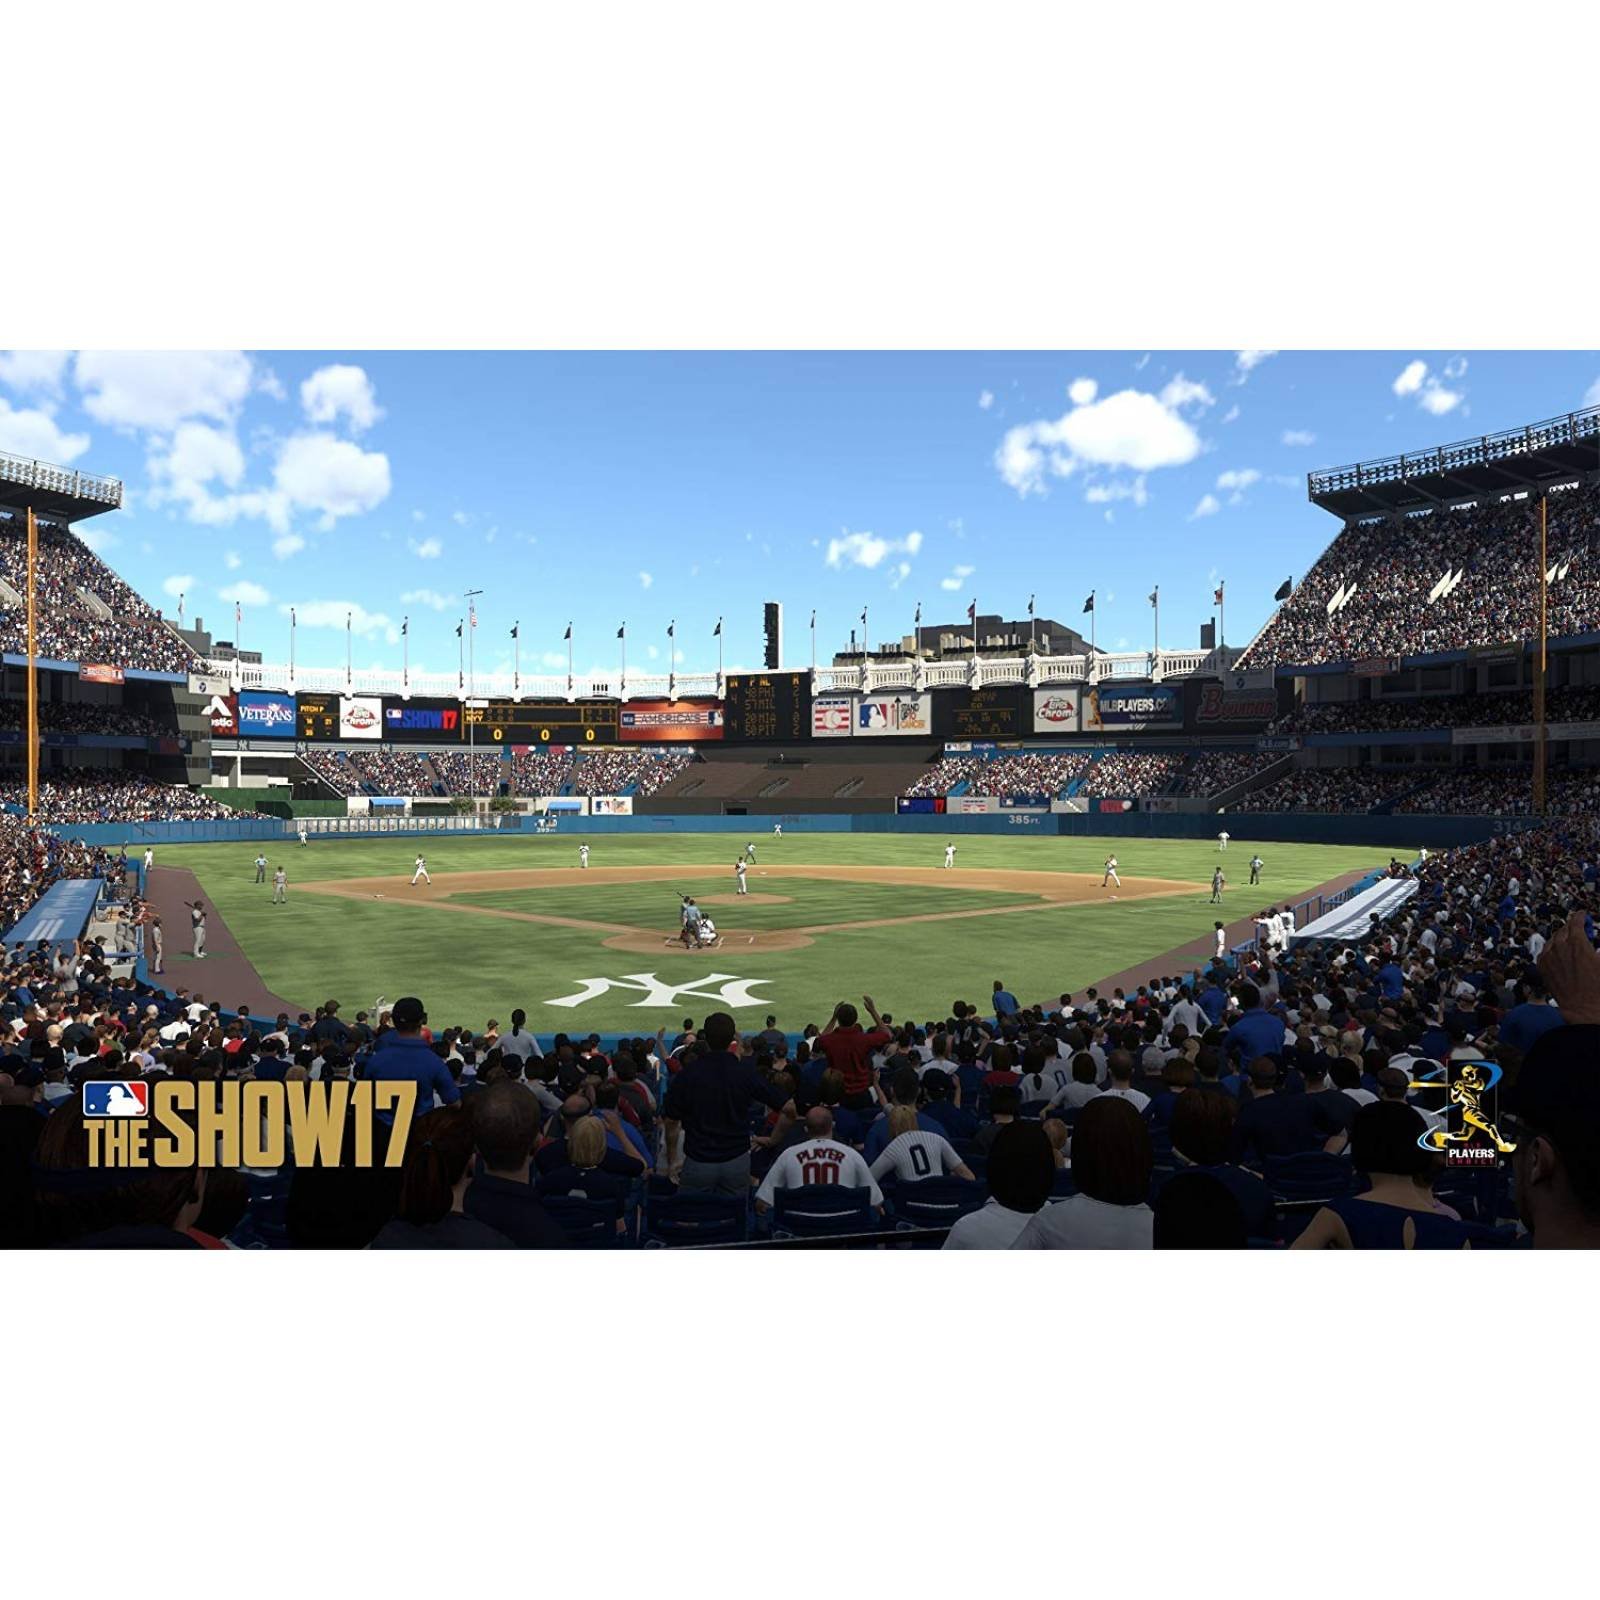 PS4 MLB The Show 17